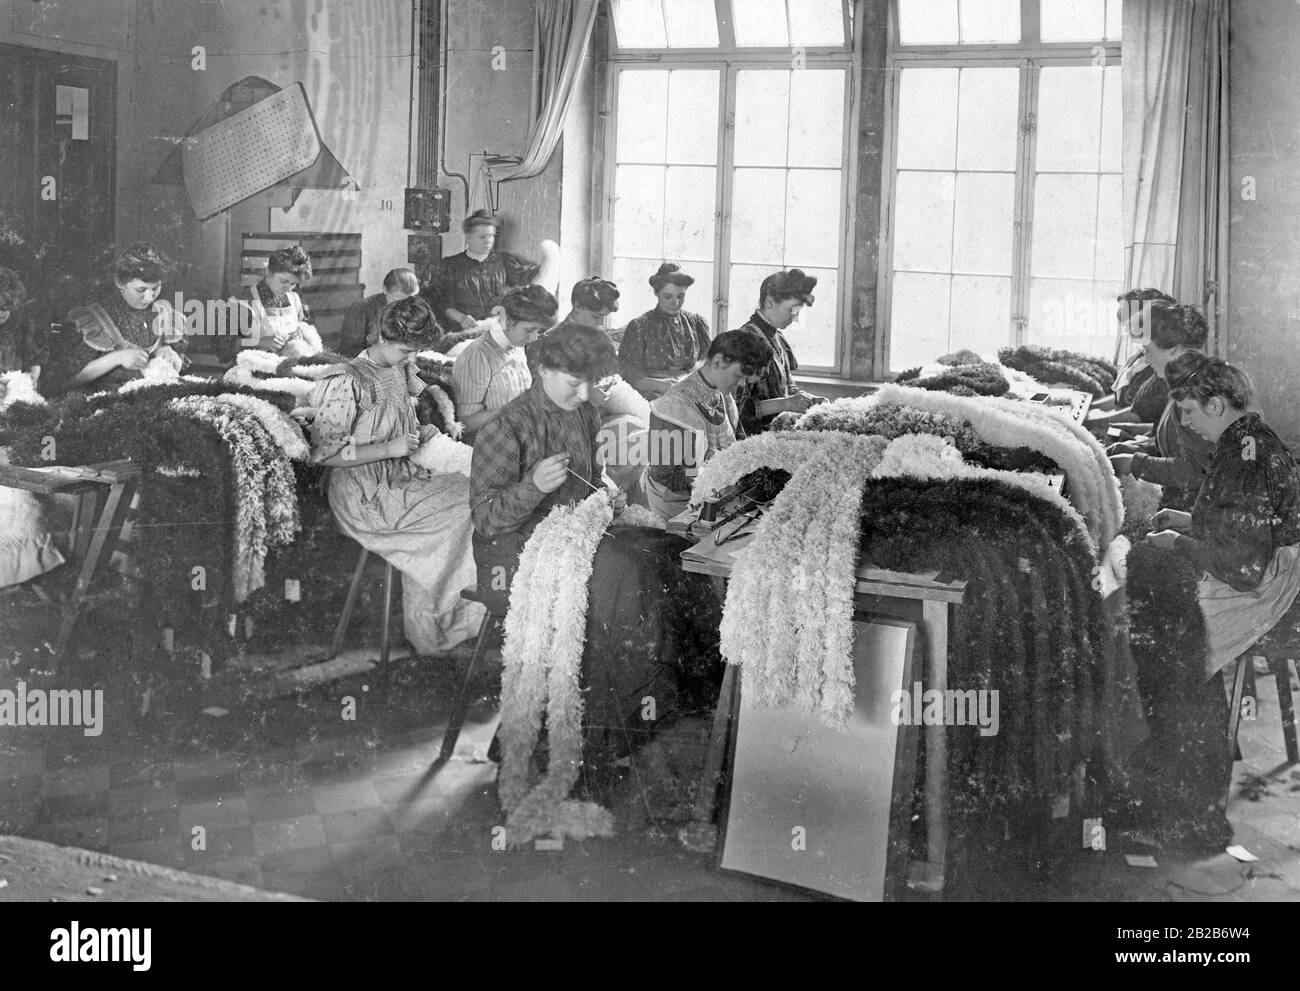 Women gather and sew decorative feathers in a factory. Stock Photo